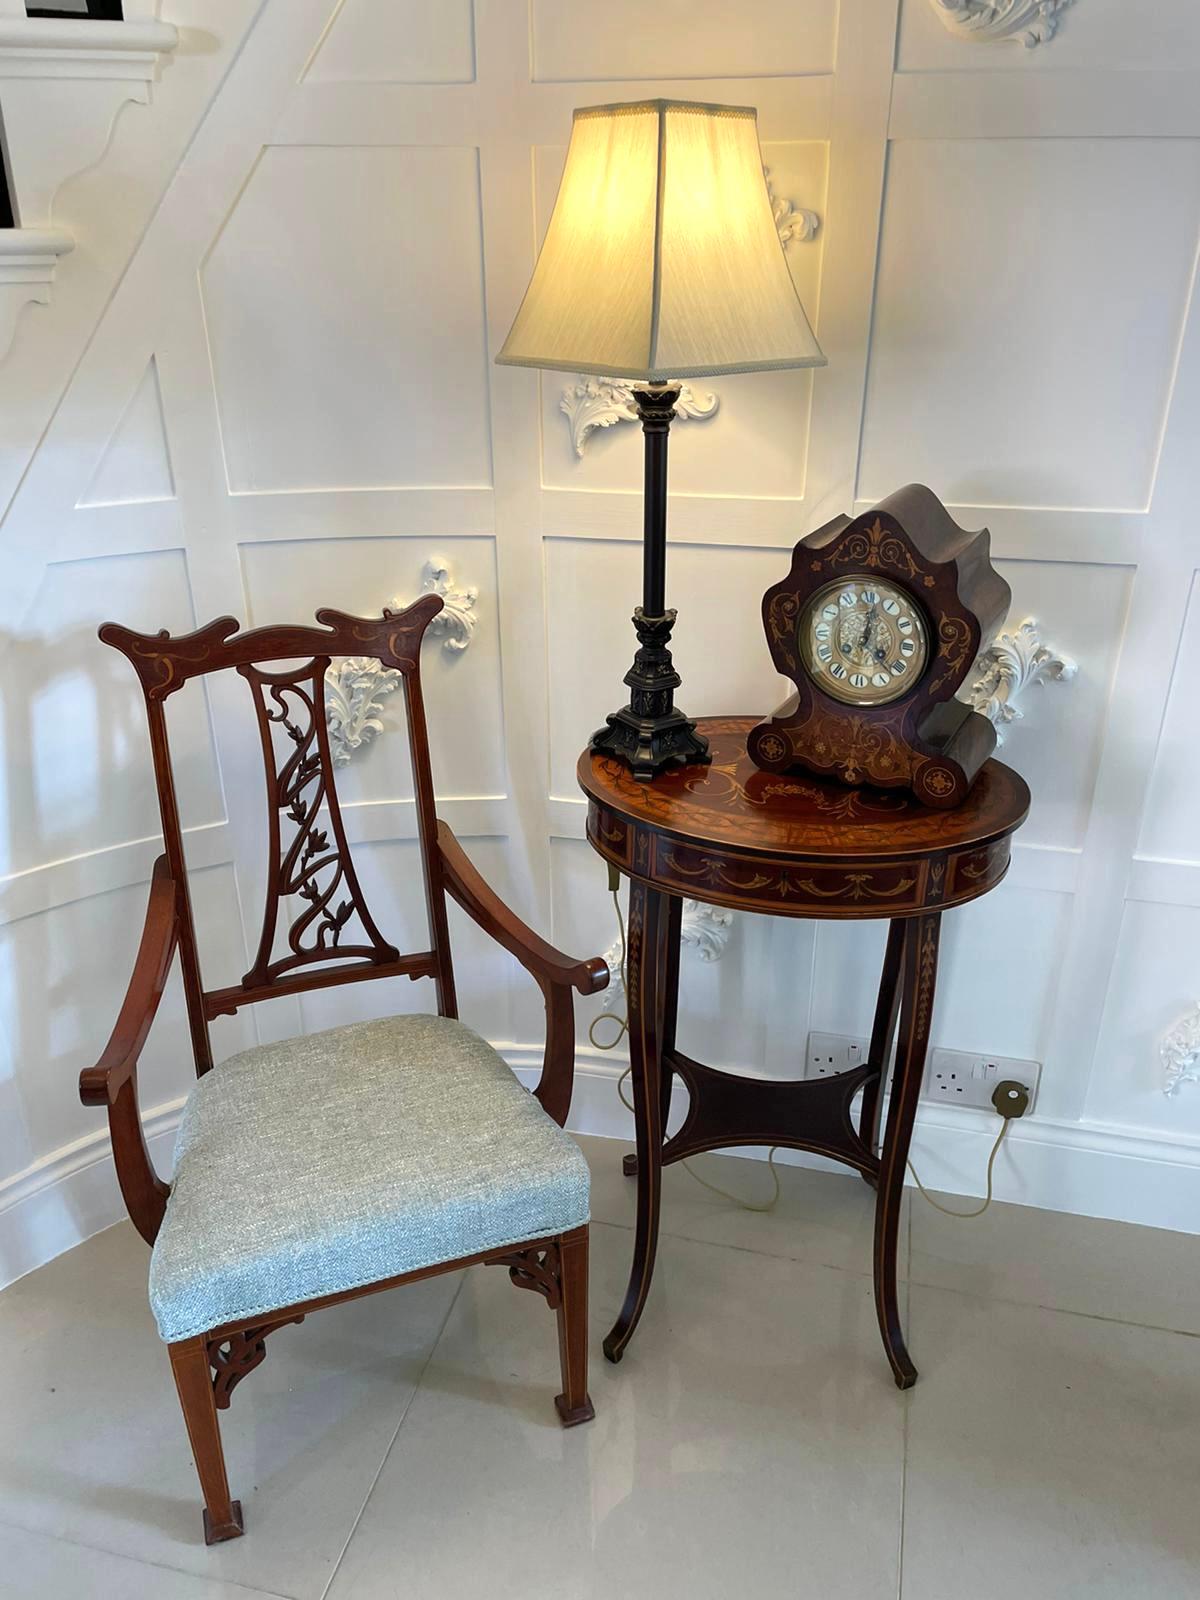 Antique 19th century French antique rosewood marquetry inlaid eight day mantel clock with a beautiful shaped marquetry inlaid case with an eight day movement boasting a delightful Roman numeral dial.

A quaint piece in good working